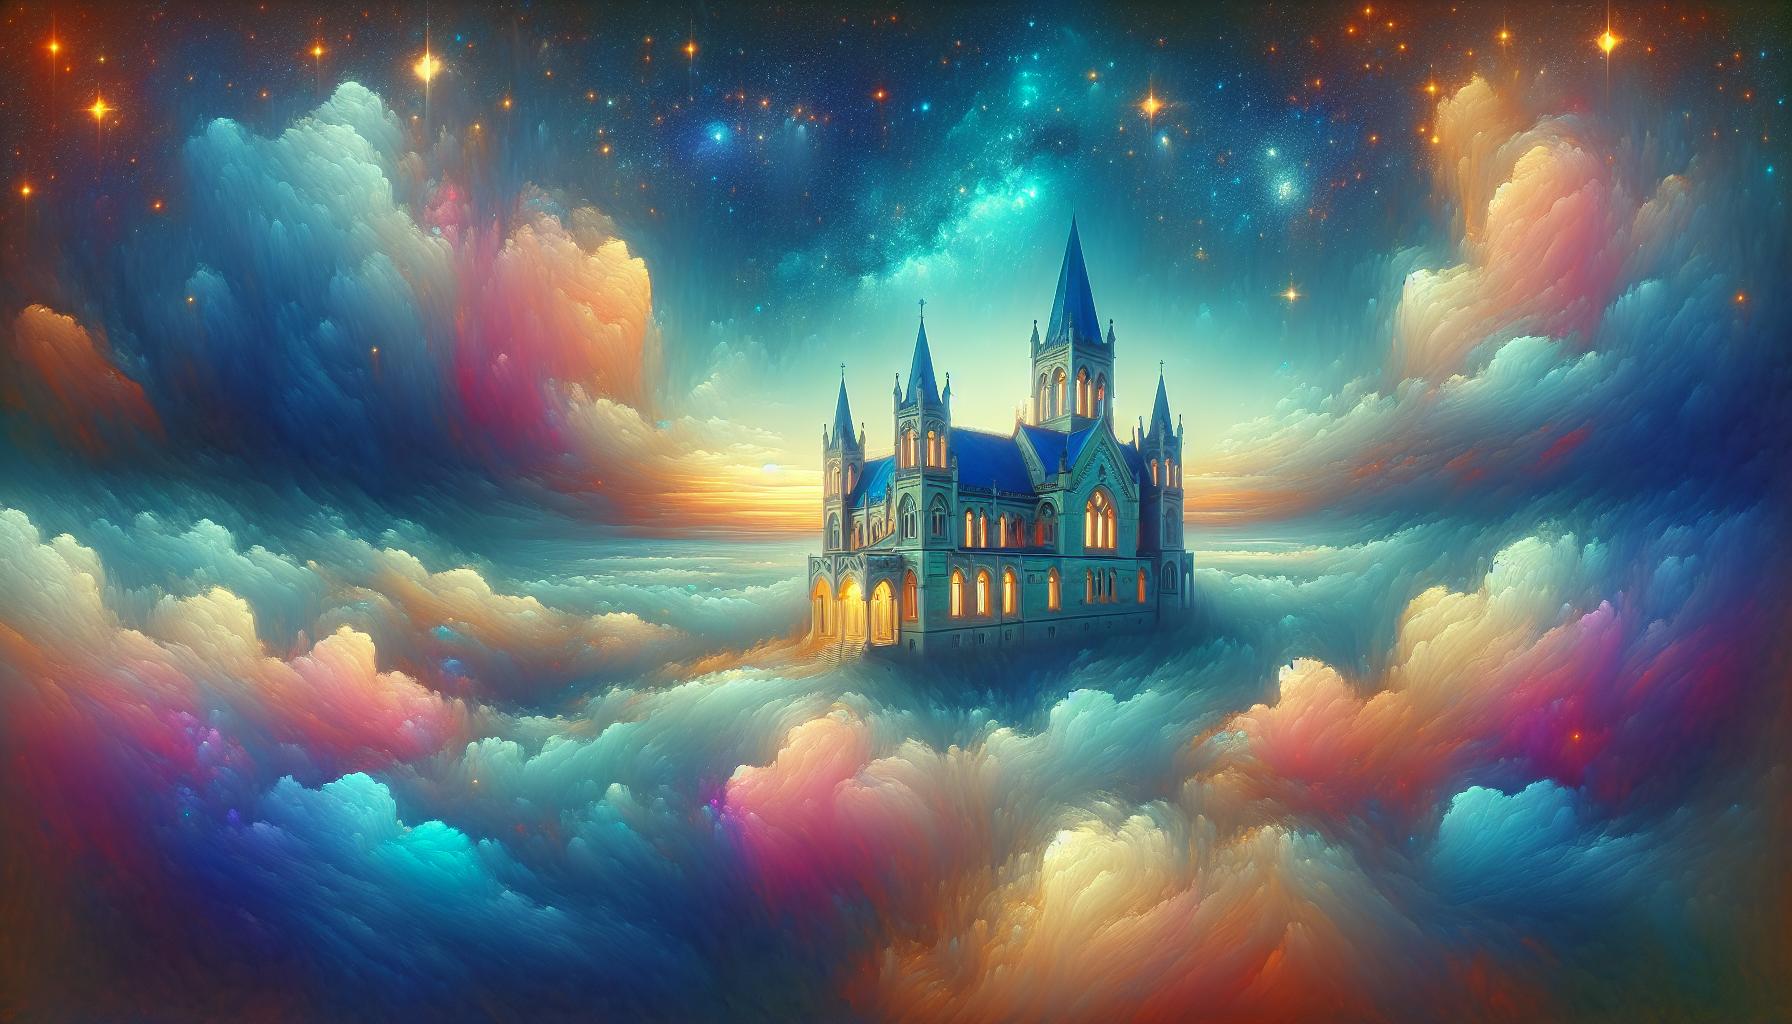 An ethereal and surreal painting of a Royal Funeral Home set in a dreamlike landscape, with a majestic, castle-like architecture, surrounded by soft, misty clouds and a serene, starry night sky, refle